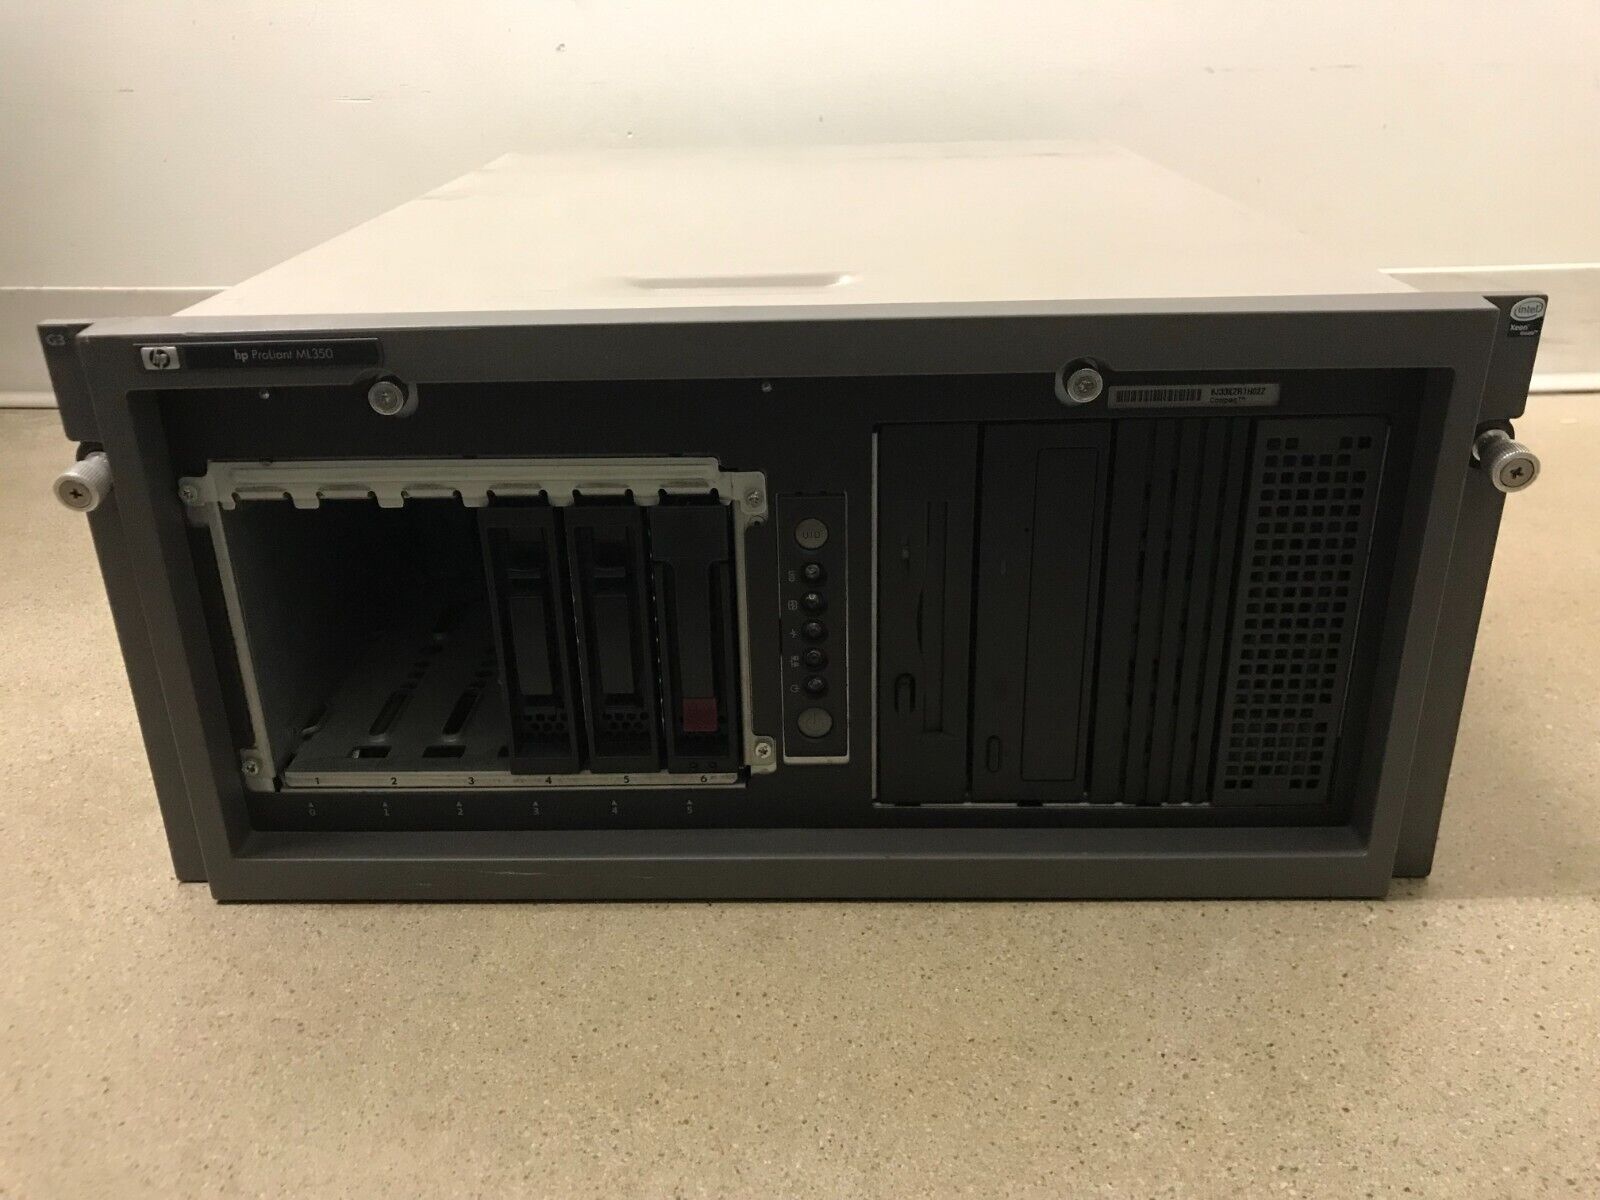 Compaq HP ProLiant ML350 G3 Server ONLY FOR PARTS